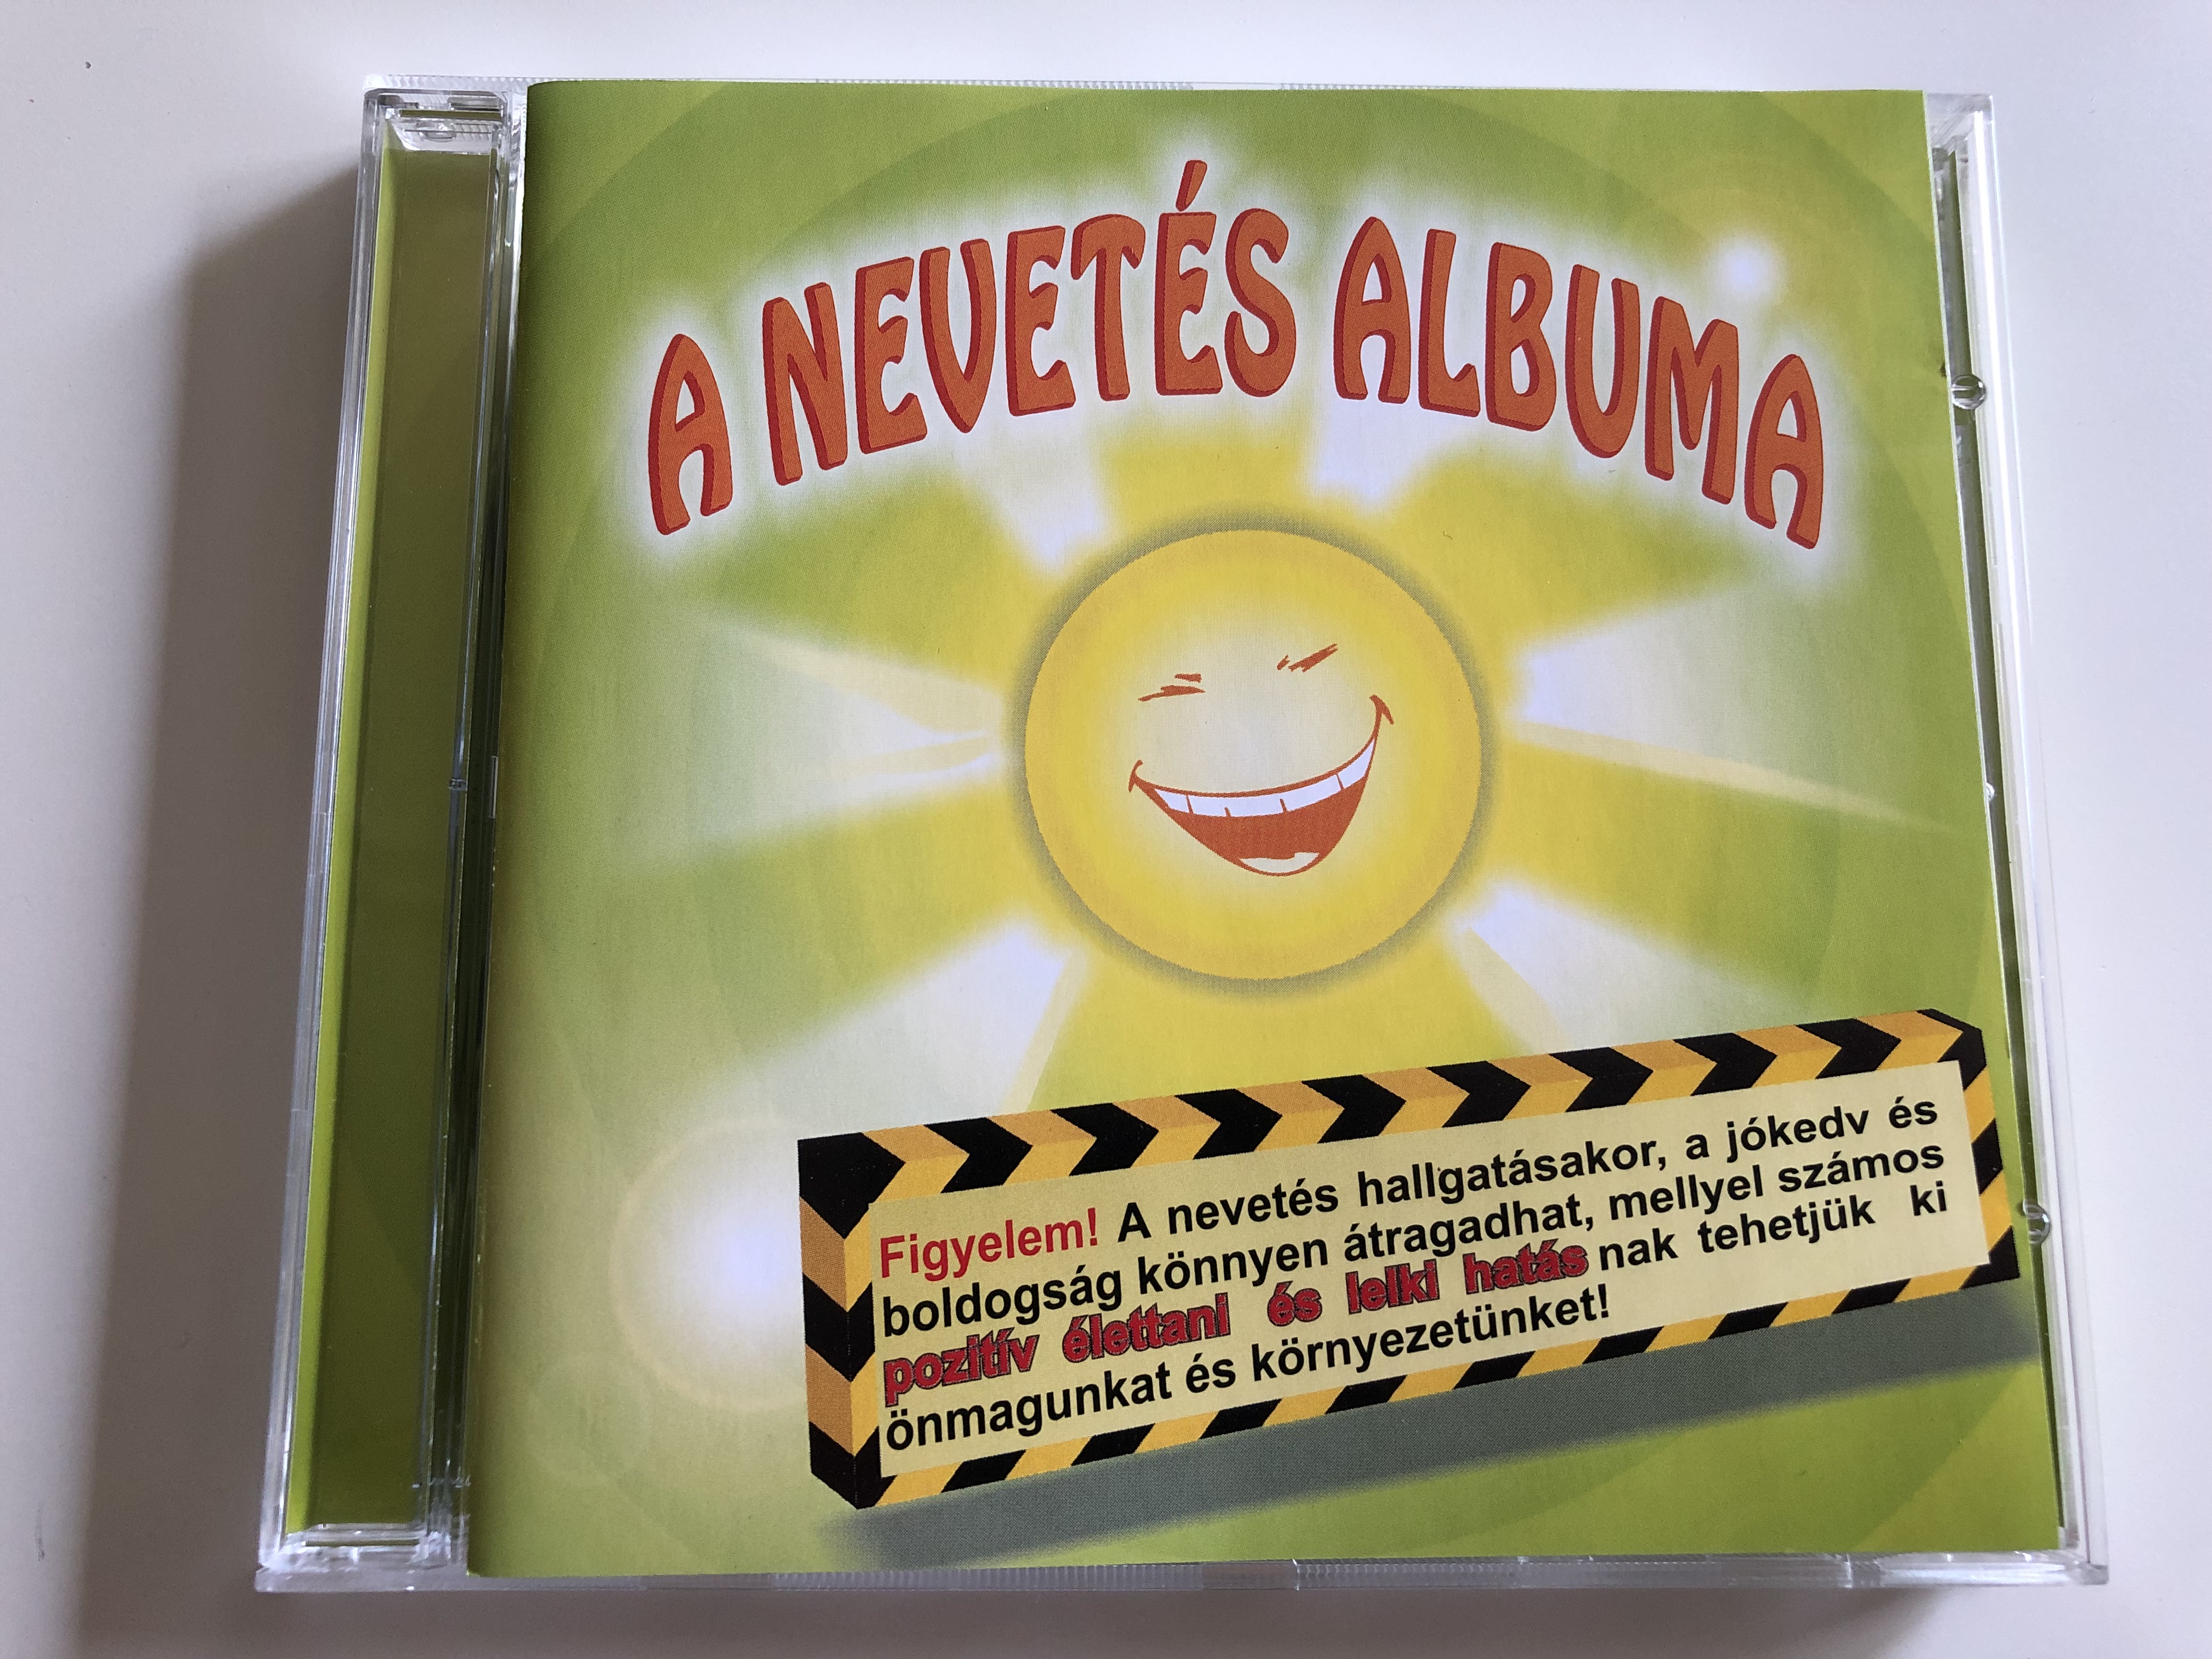 christian-satri-a-nevet-s-albuma-laughter-album-for-meditational-and-therapeuthical-purposes-chr-7-audio-cd-1-.jpg